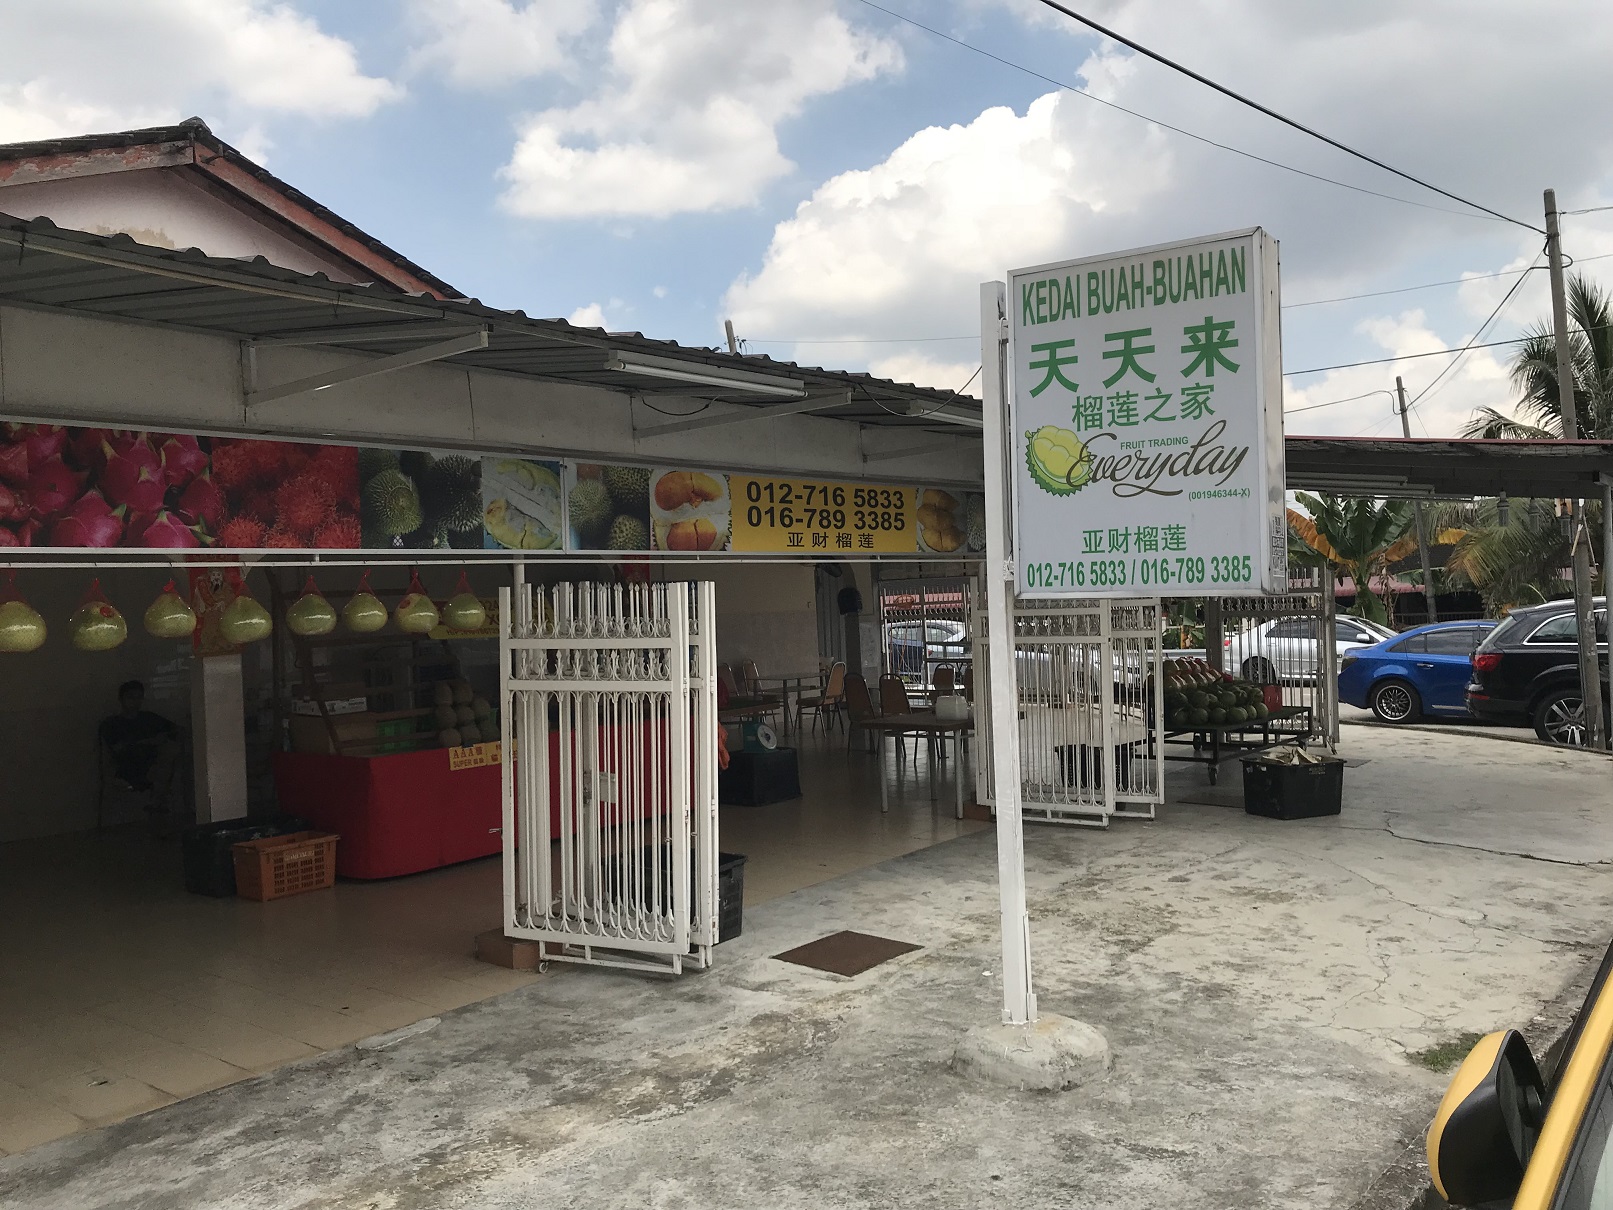 Durian in JB is cheap and good!